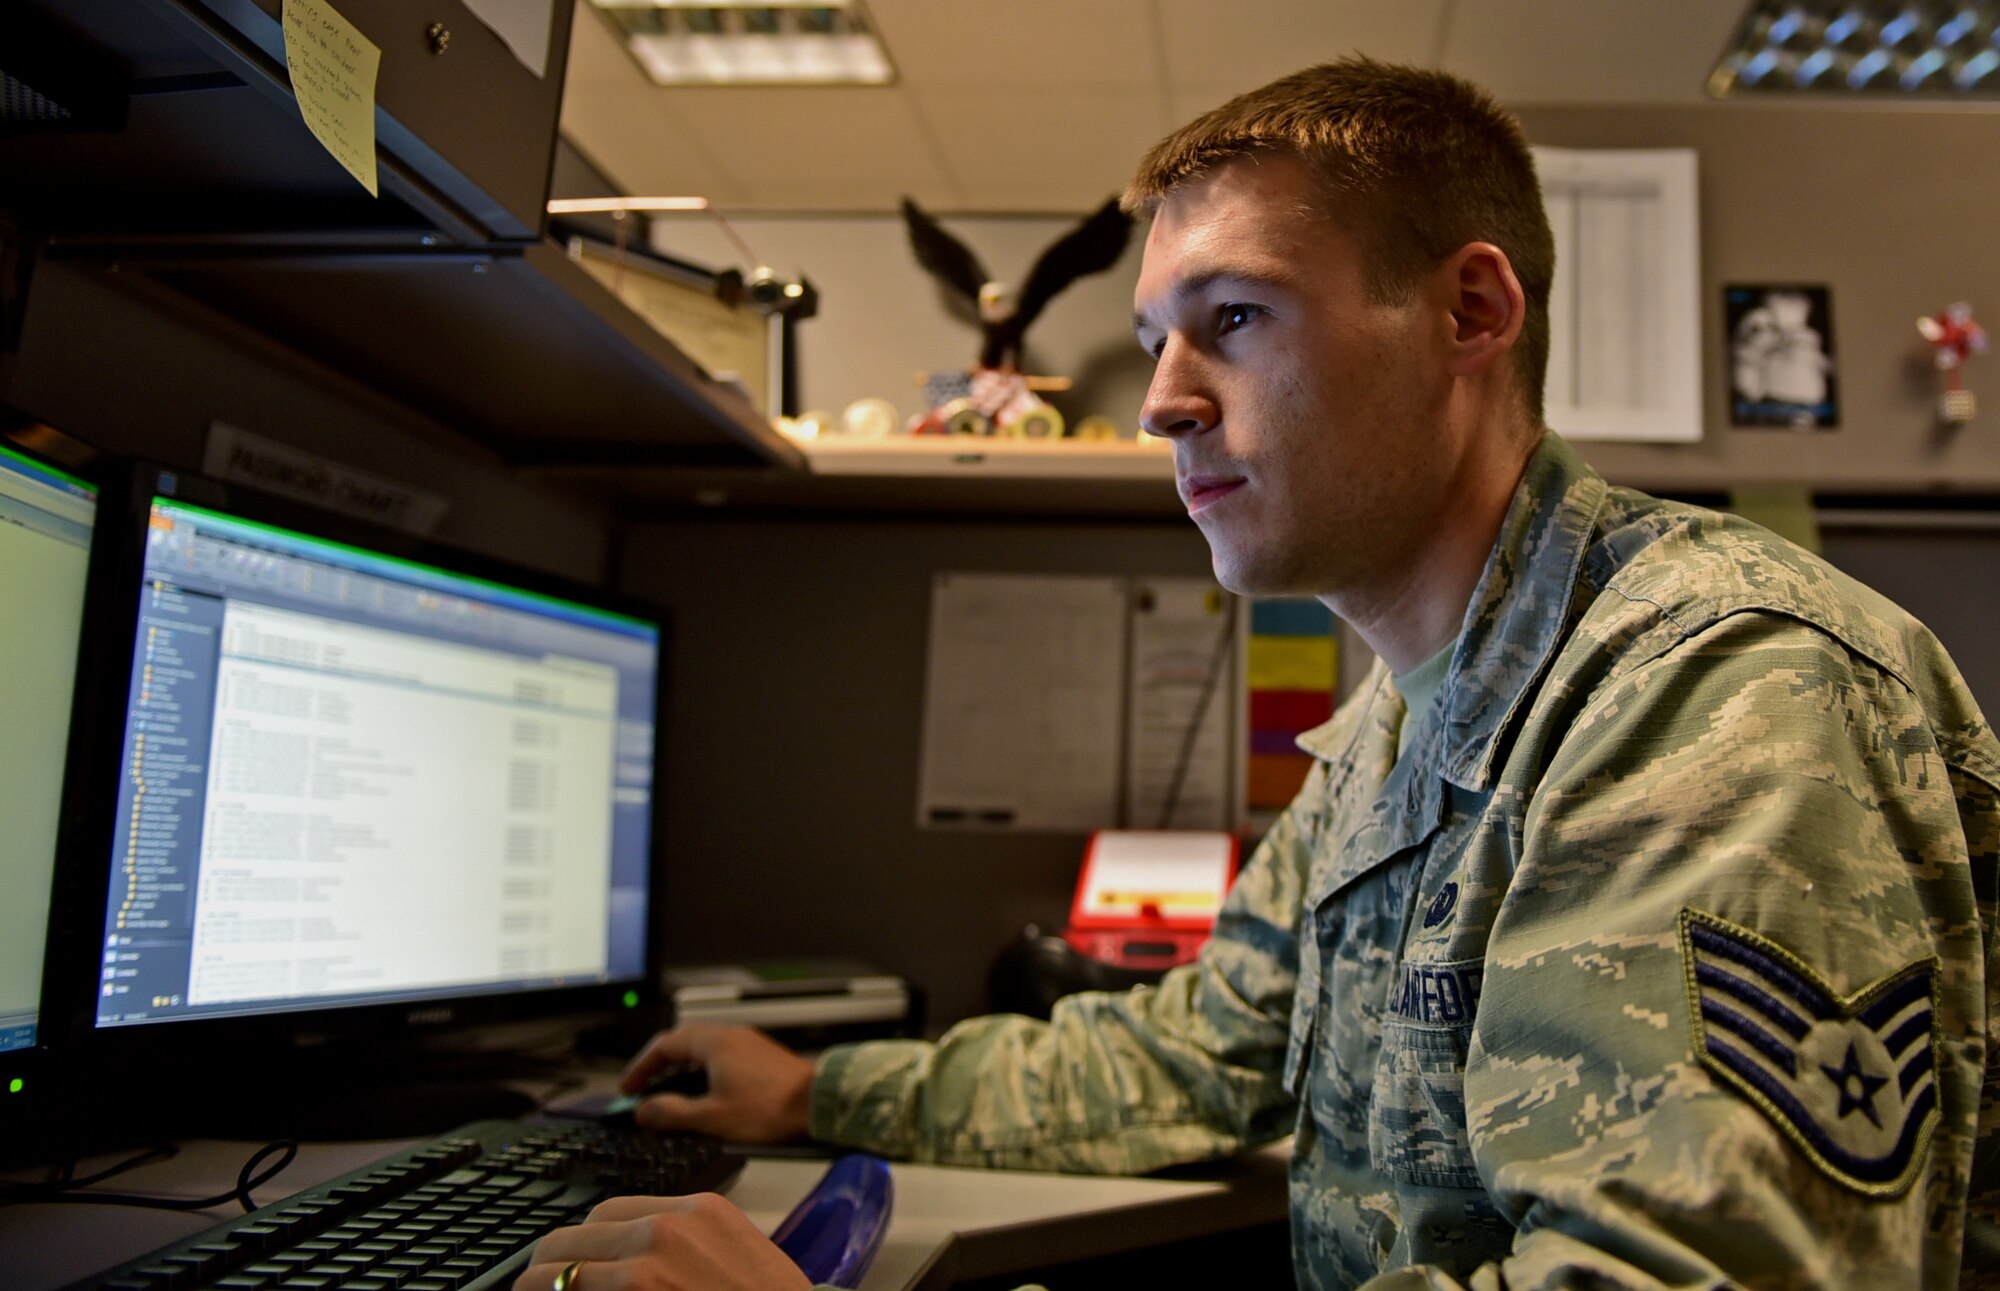 Air Force Staff Sgt. Chris Meyer, 28th Contracting Squadron contract administrator, reviews paperwork at Ellsworth Air Force Base, S.D., Nov. 4, 2015. One of Meyer’s primary duties is reviewing contracts to ensure they comply with Air Force guidelines. U.S. Air Force photo by Airman 1st Class James L. Miller